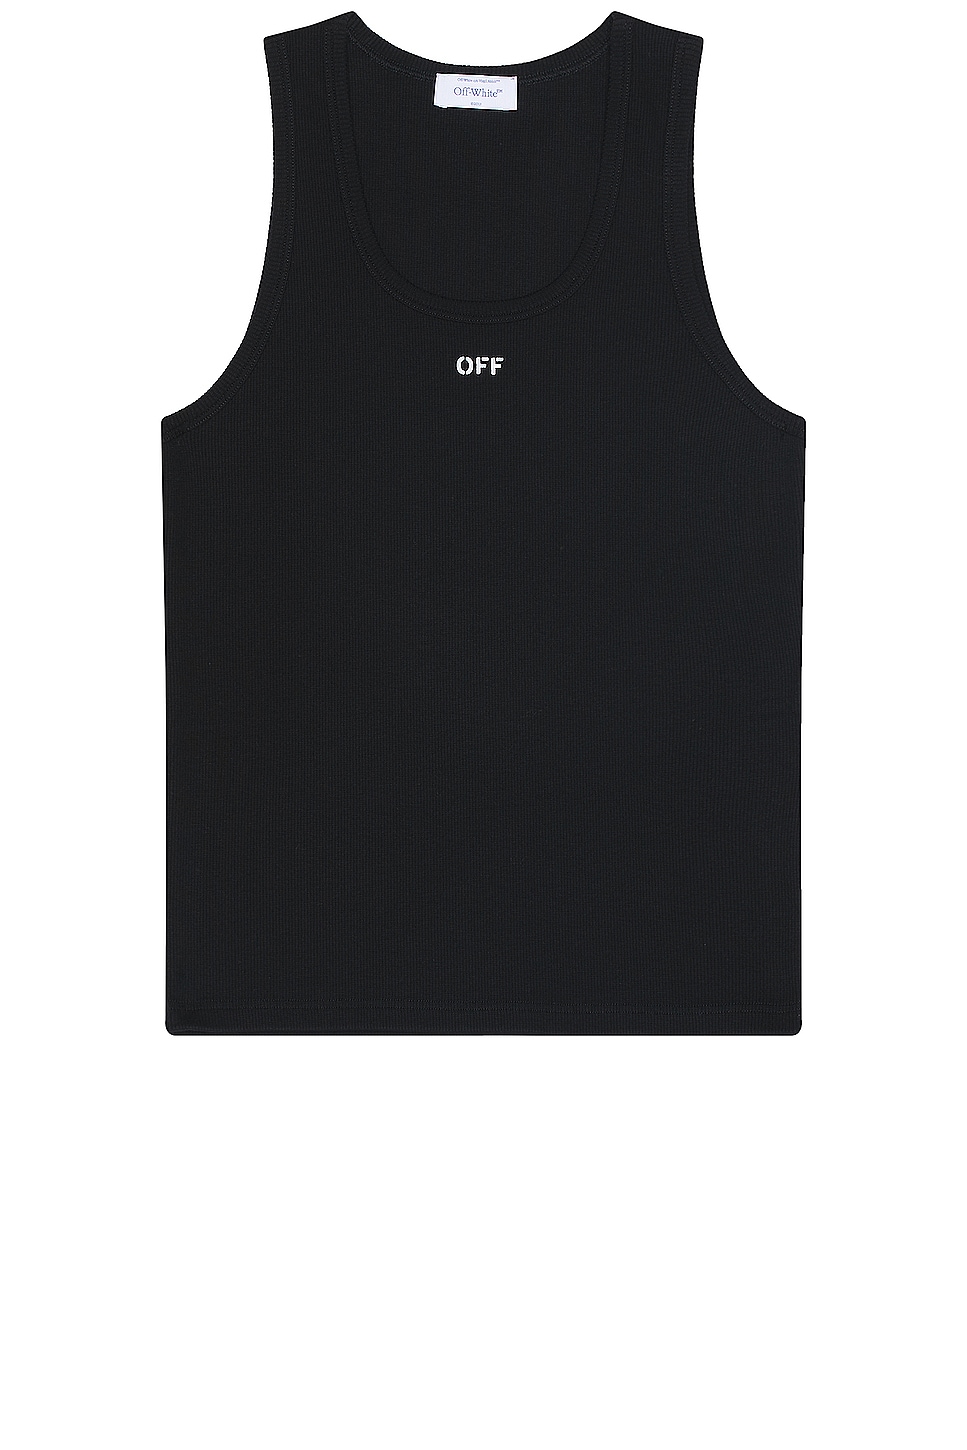 Image 1 of OFF-WHITE Stamp Tank Top in Black & White